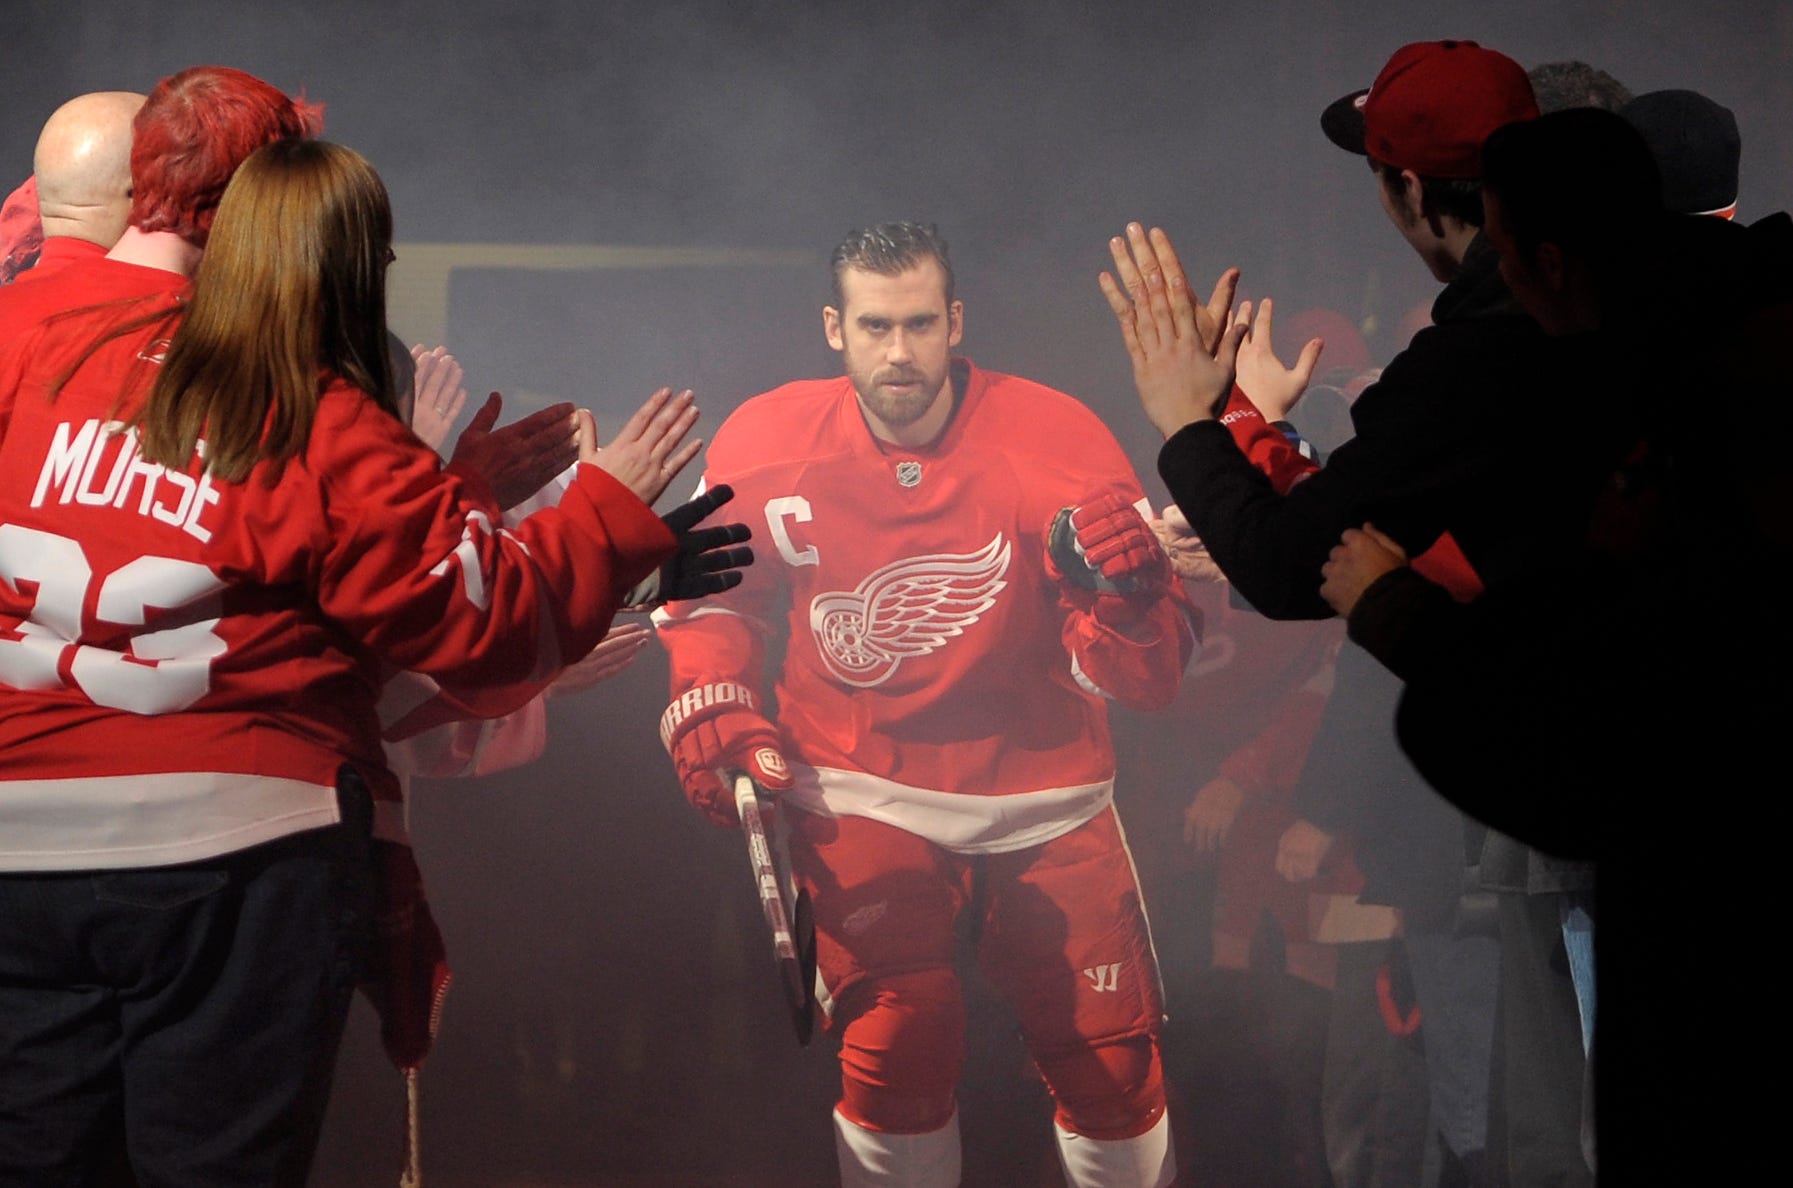 Henrik Zetterberg skates out onto the ice to the welcome of fans during the pre-game ceremony before the start of a game against the Dallas Stars at Joe Louis Arena in Detroit, January 22, 2013.